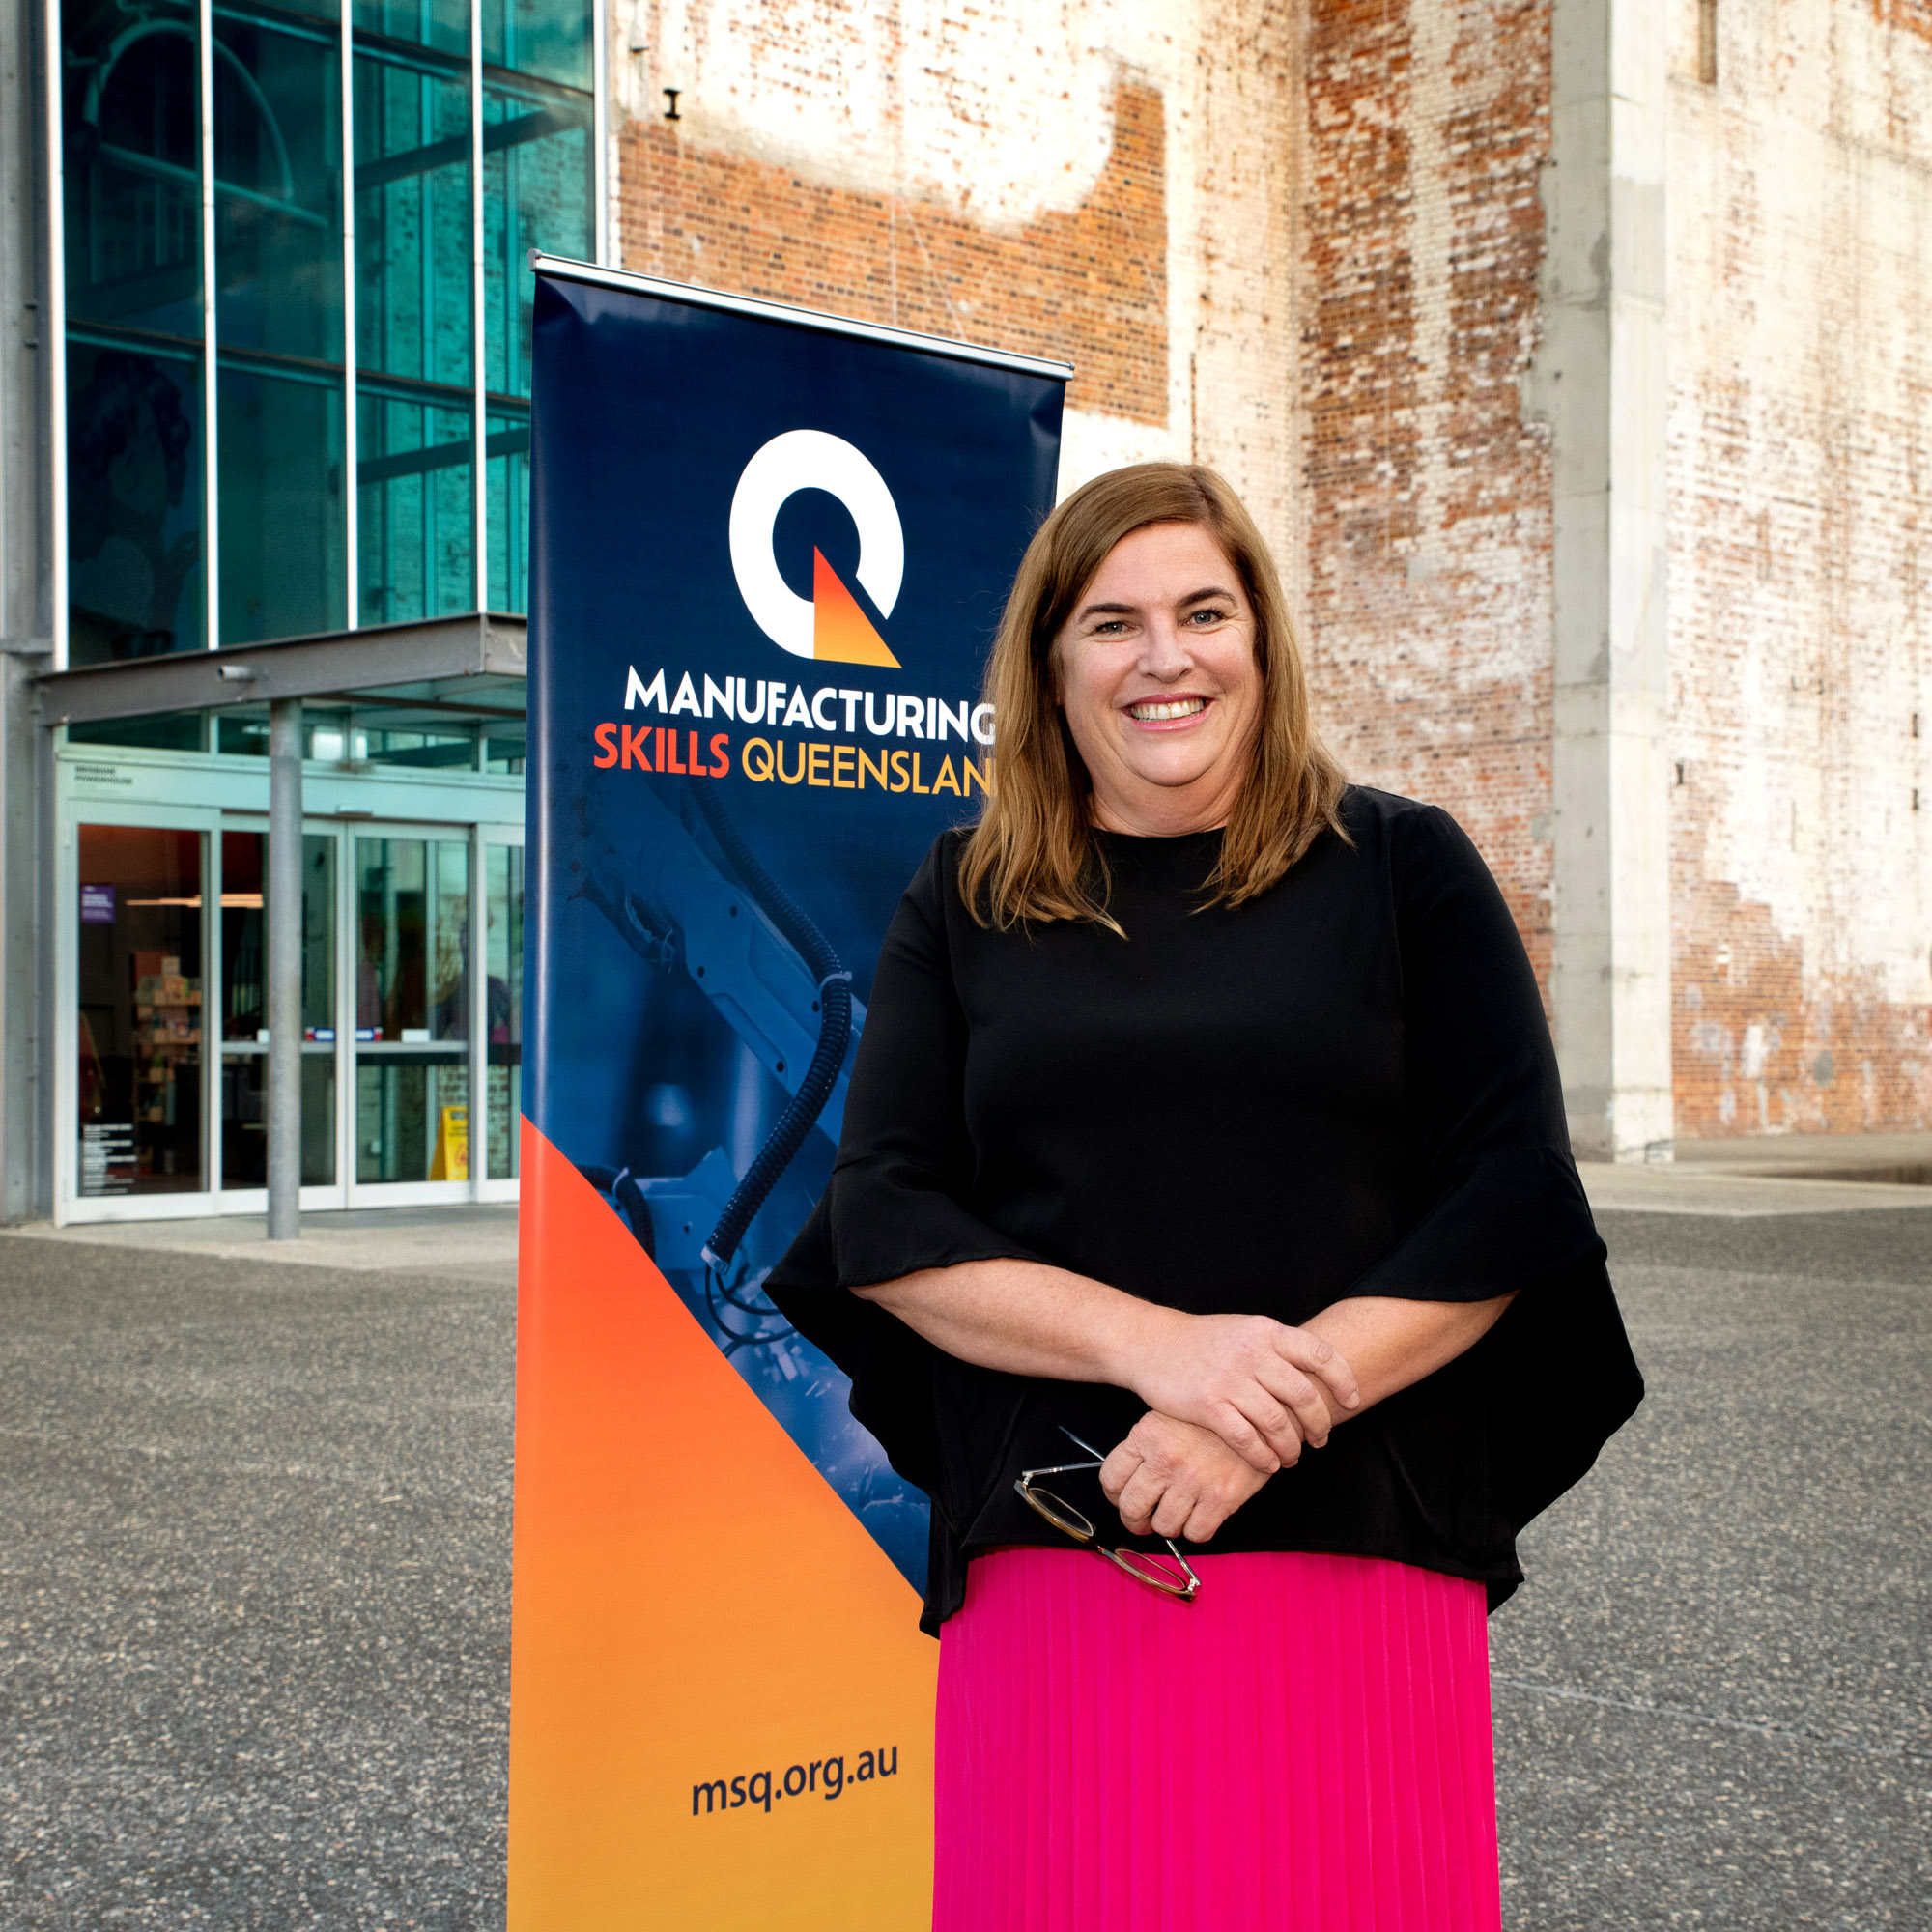 New CEO announced for Manufacturing Skills Queensland